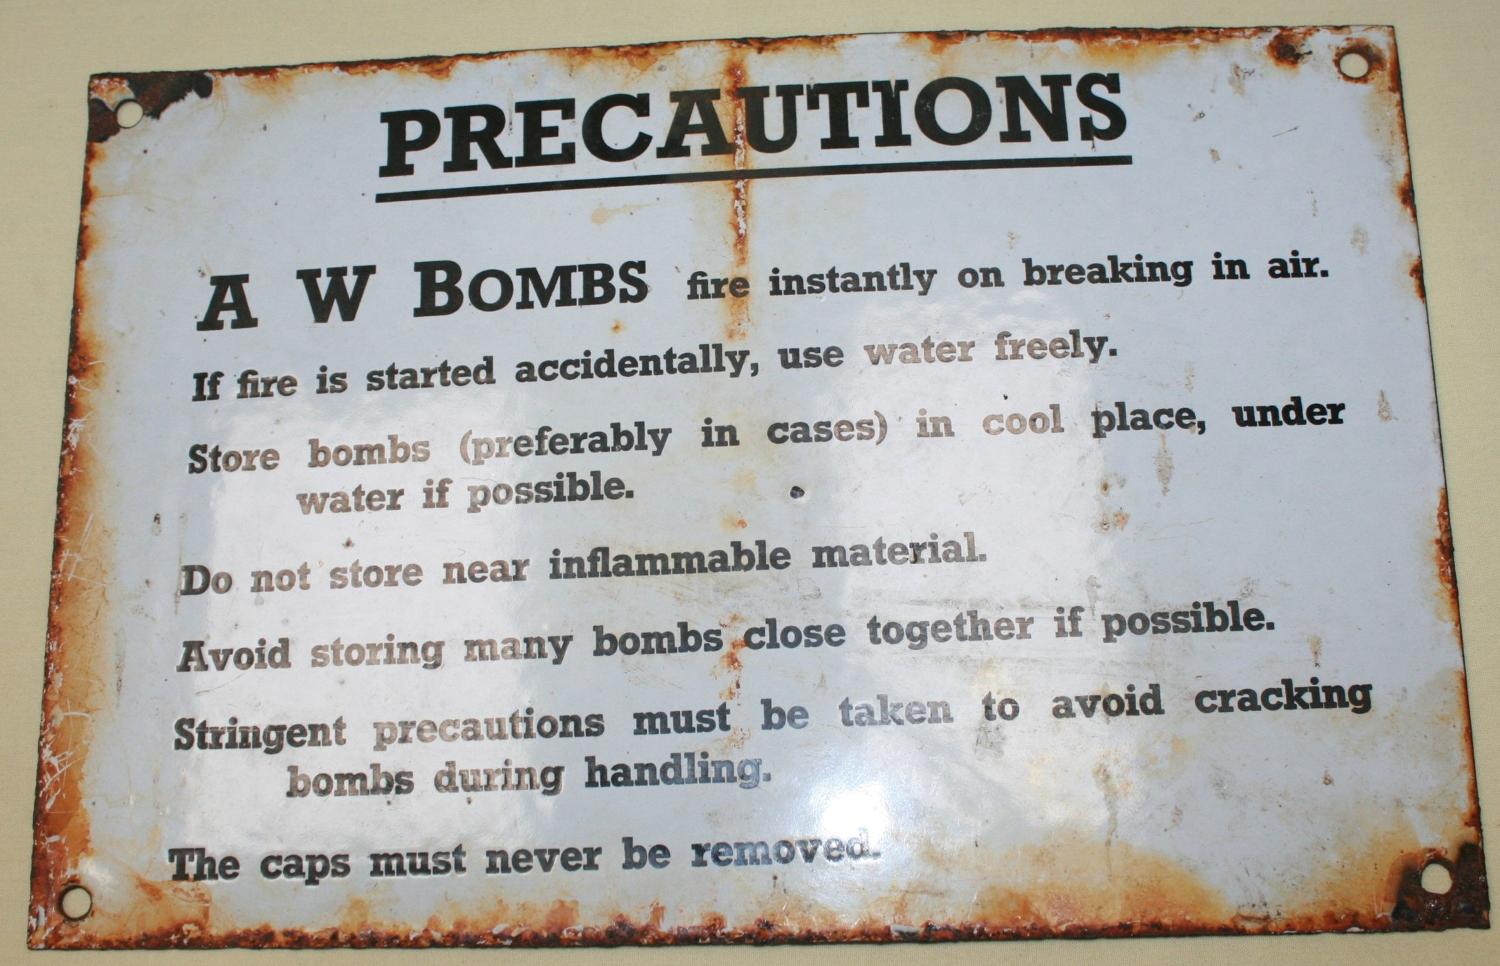 A WWII AW BOMB NOTICE